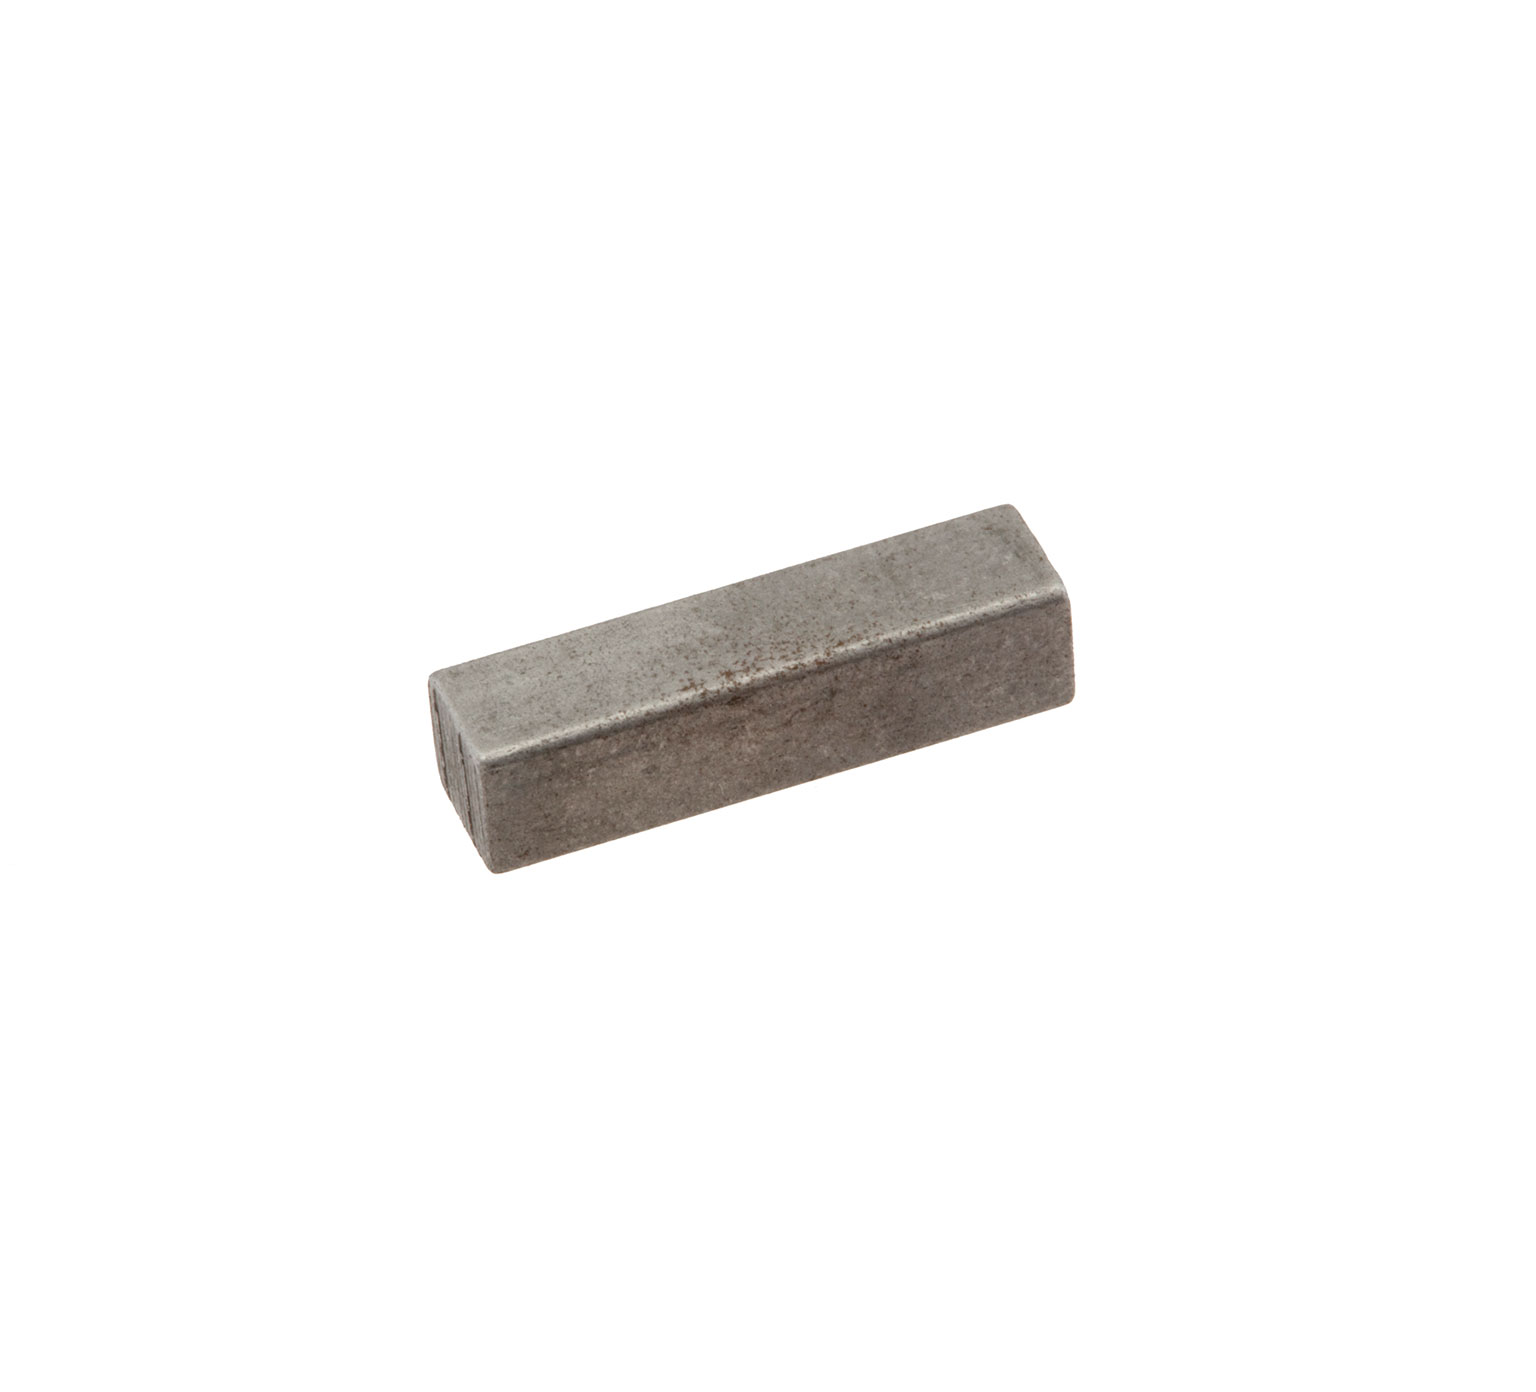 00911 Cold Rolled Steel Key - 0.187 x 0.187 x 0.75 in alt 1